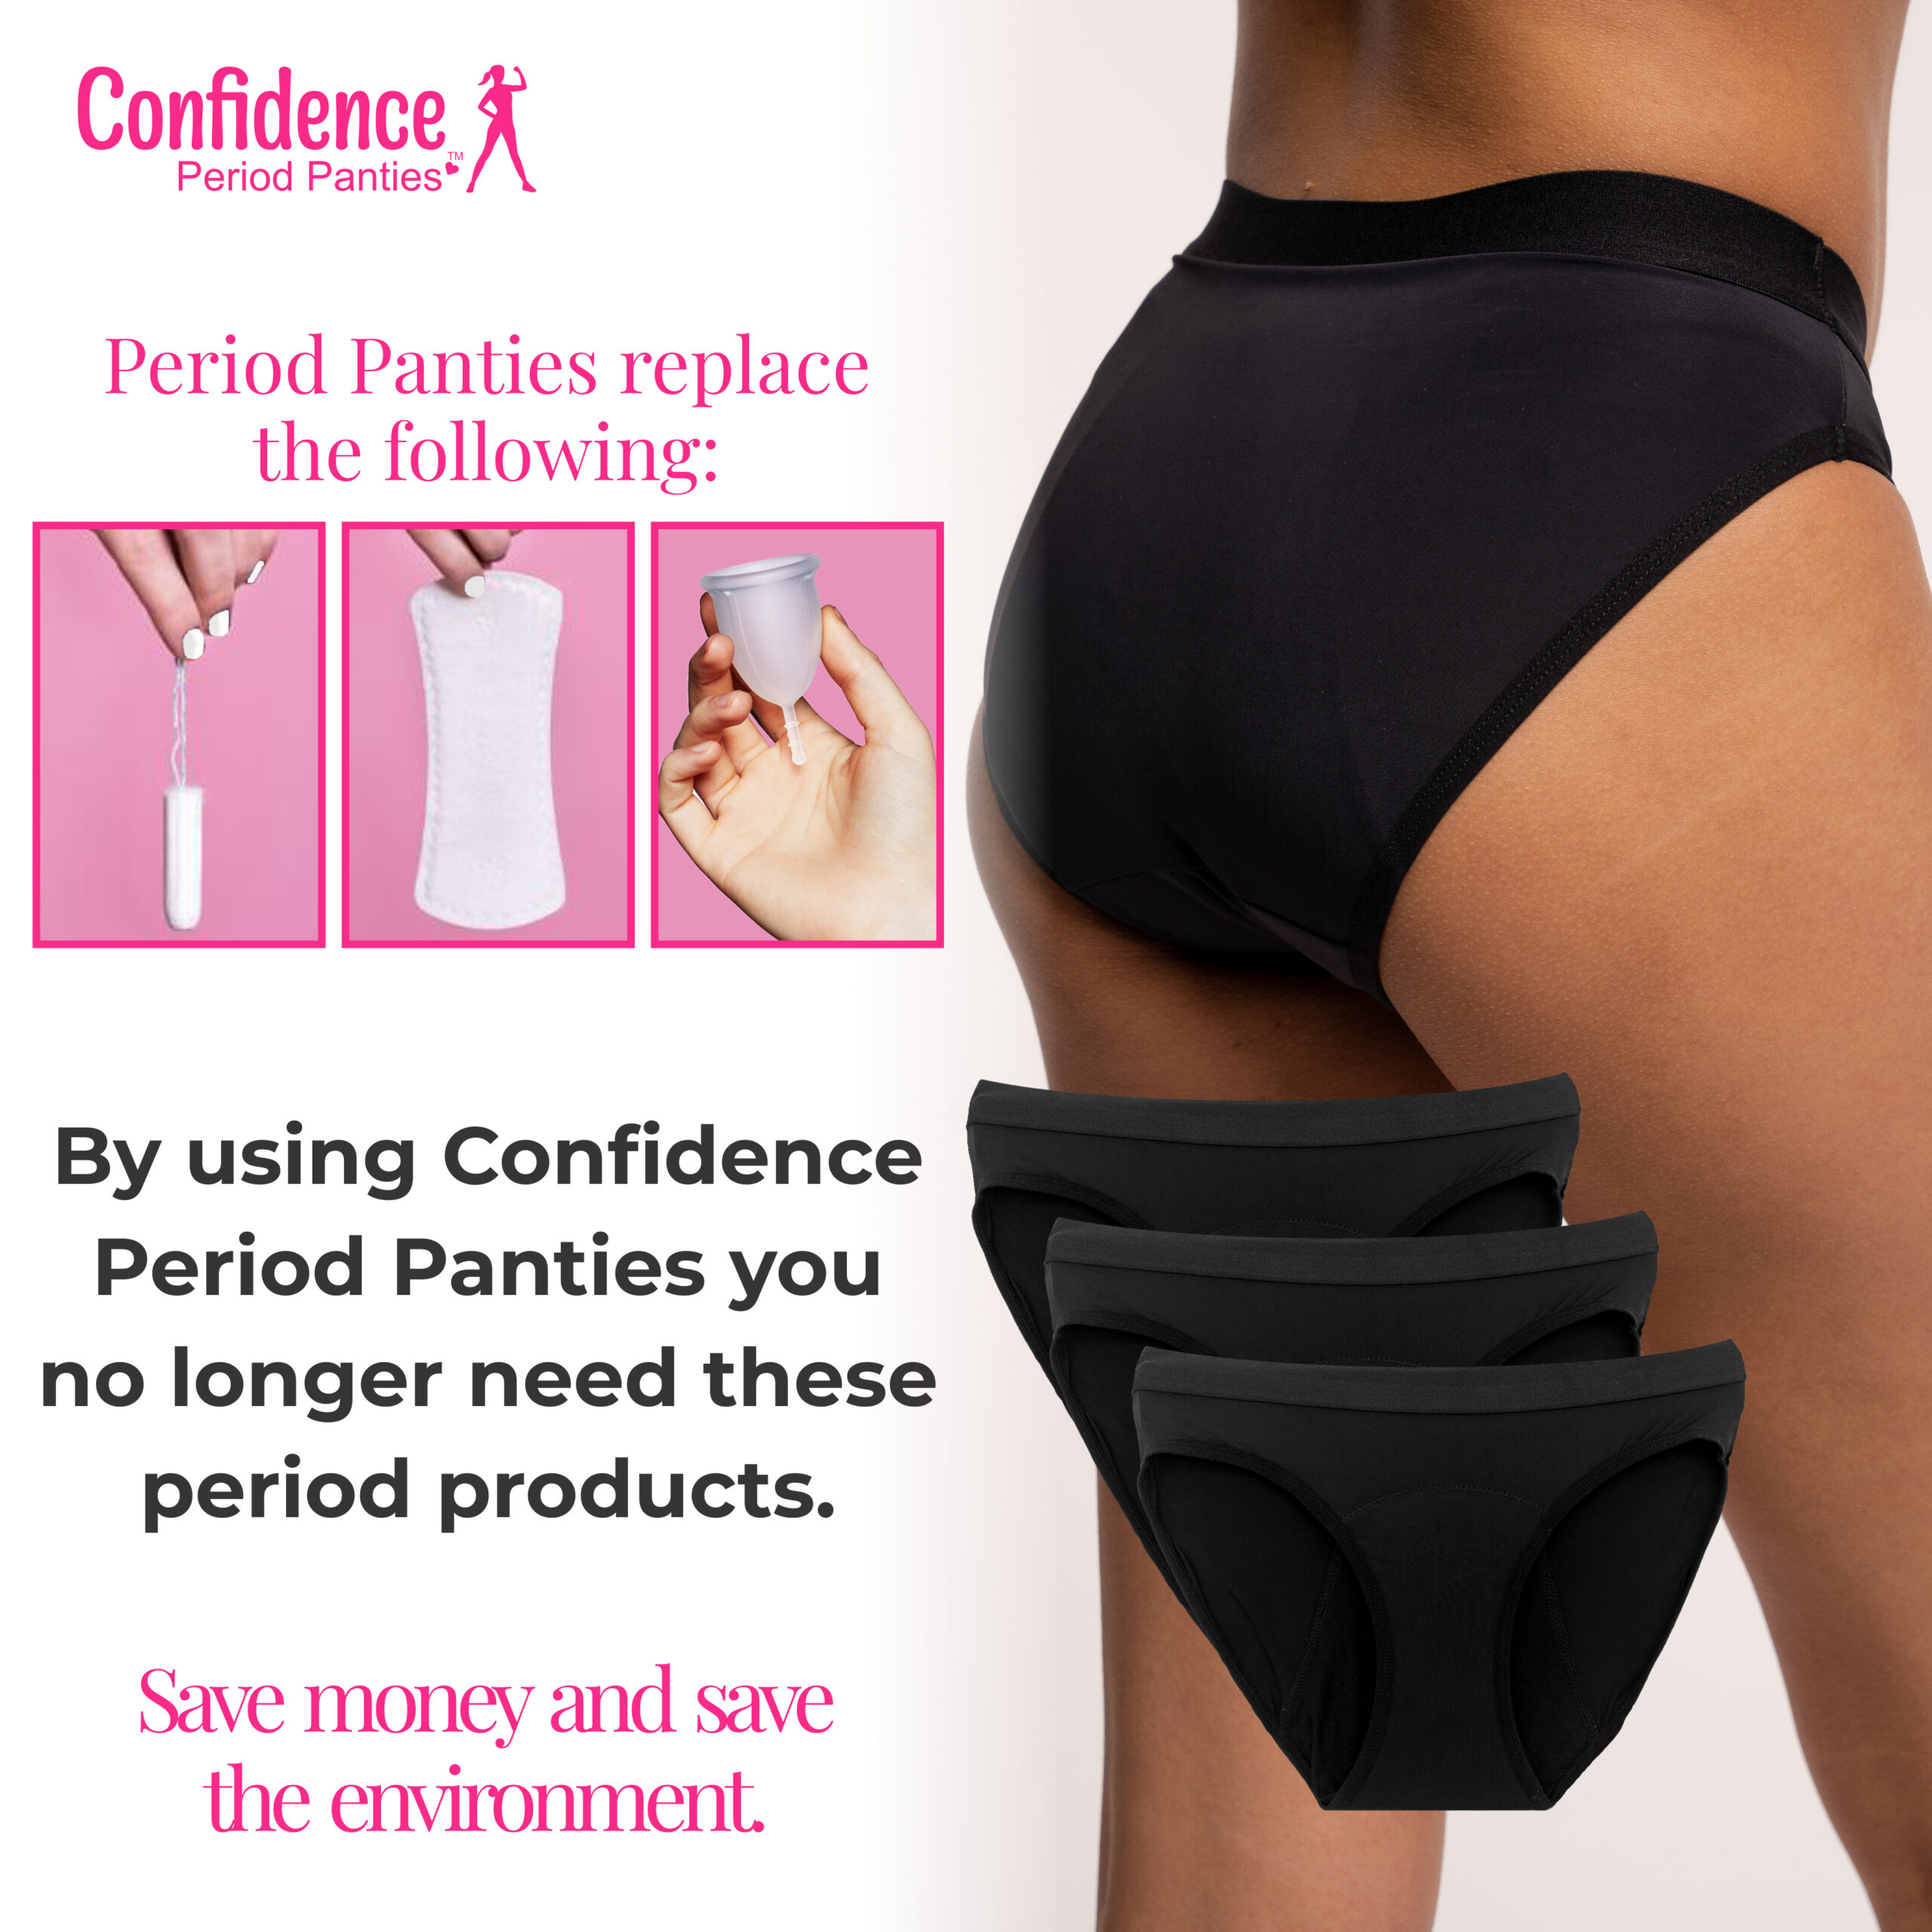 StainFree Reusable Period Panty - 2 Pack Brief (M)